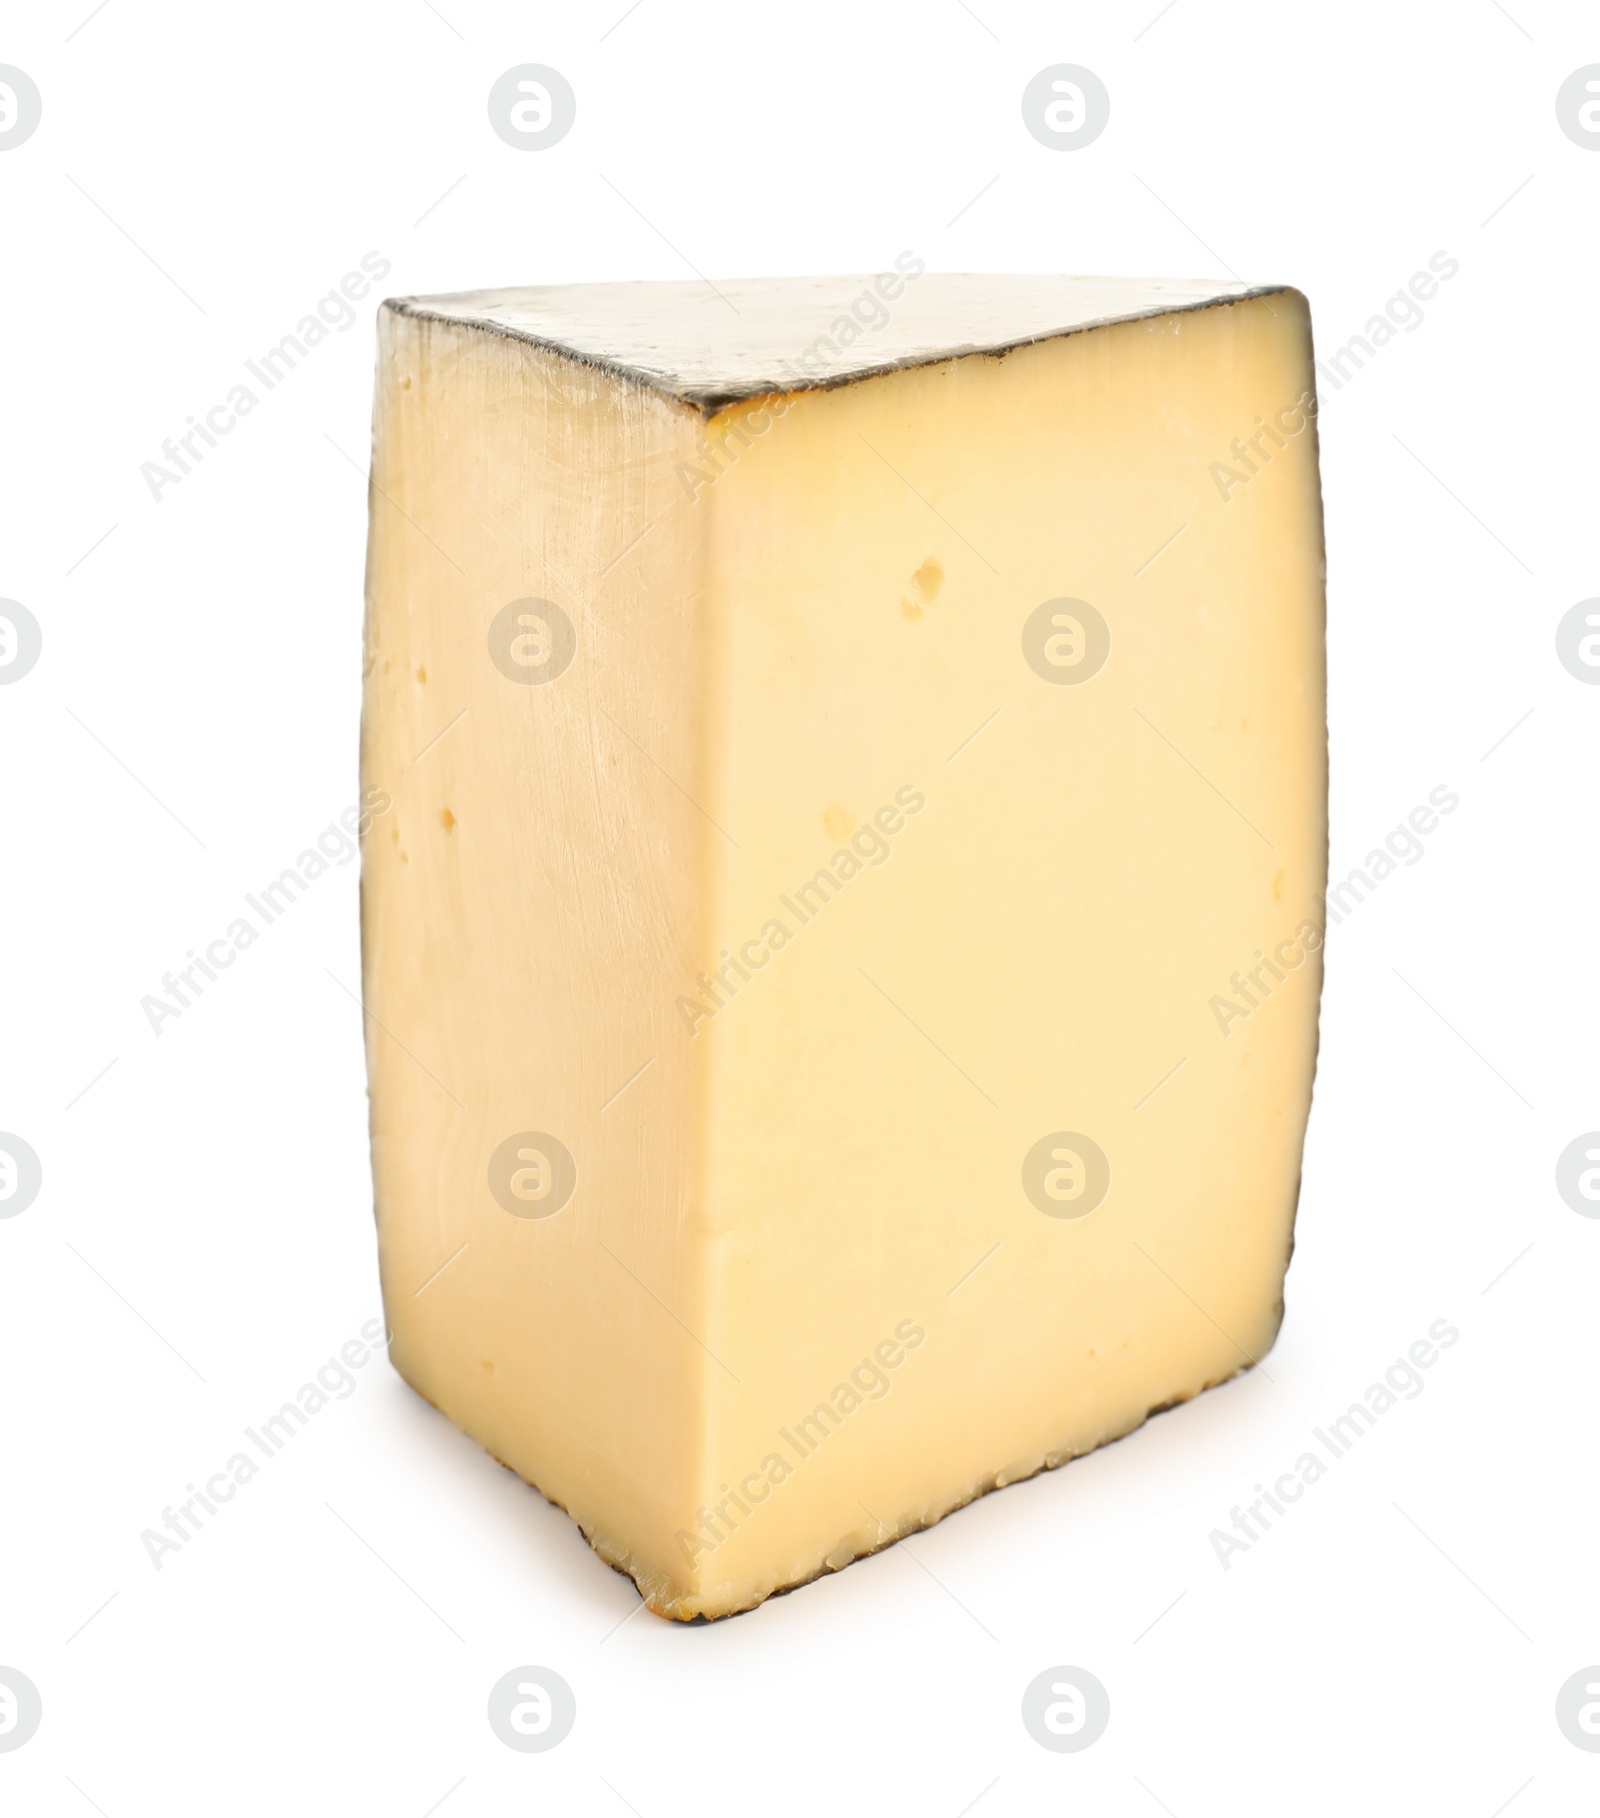 Photo of Piece of tasty fresh cheese isolated on white